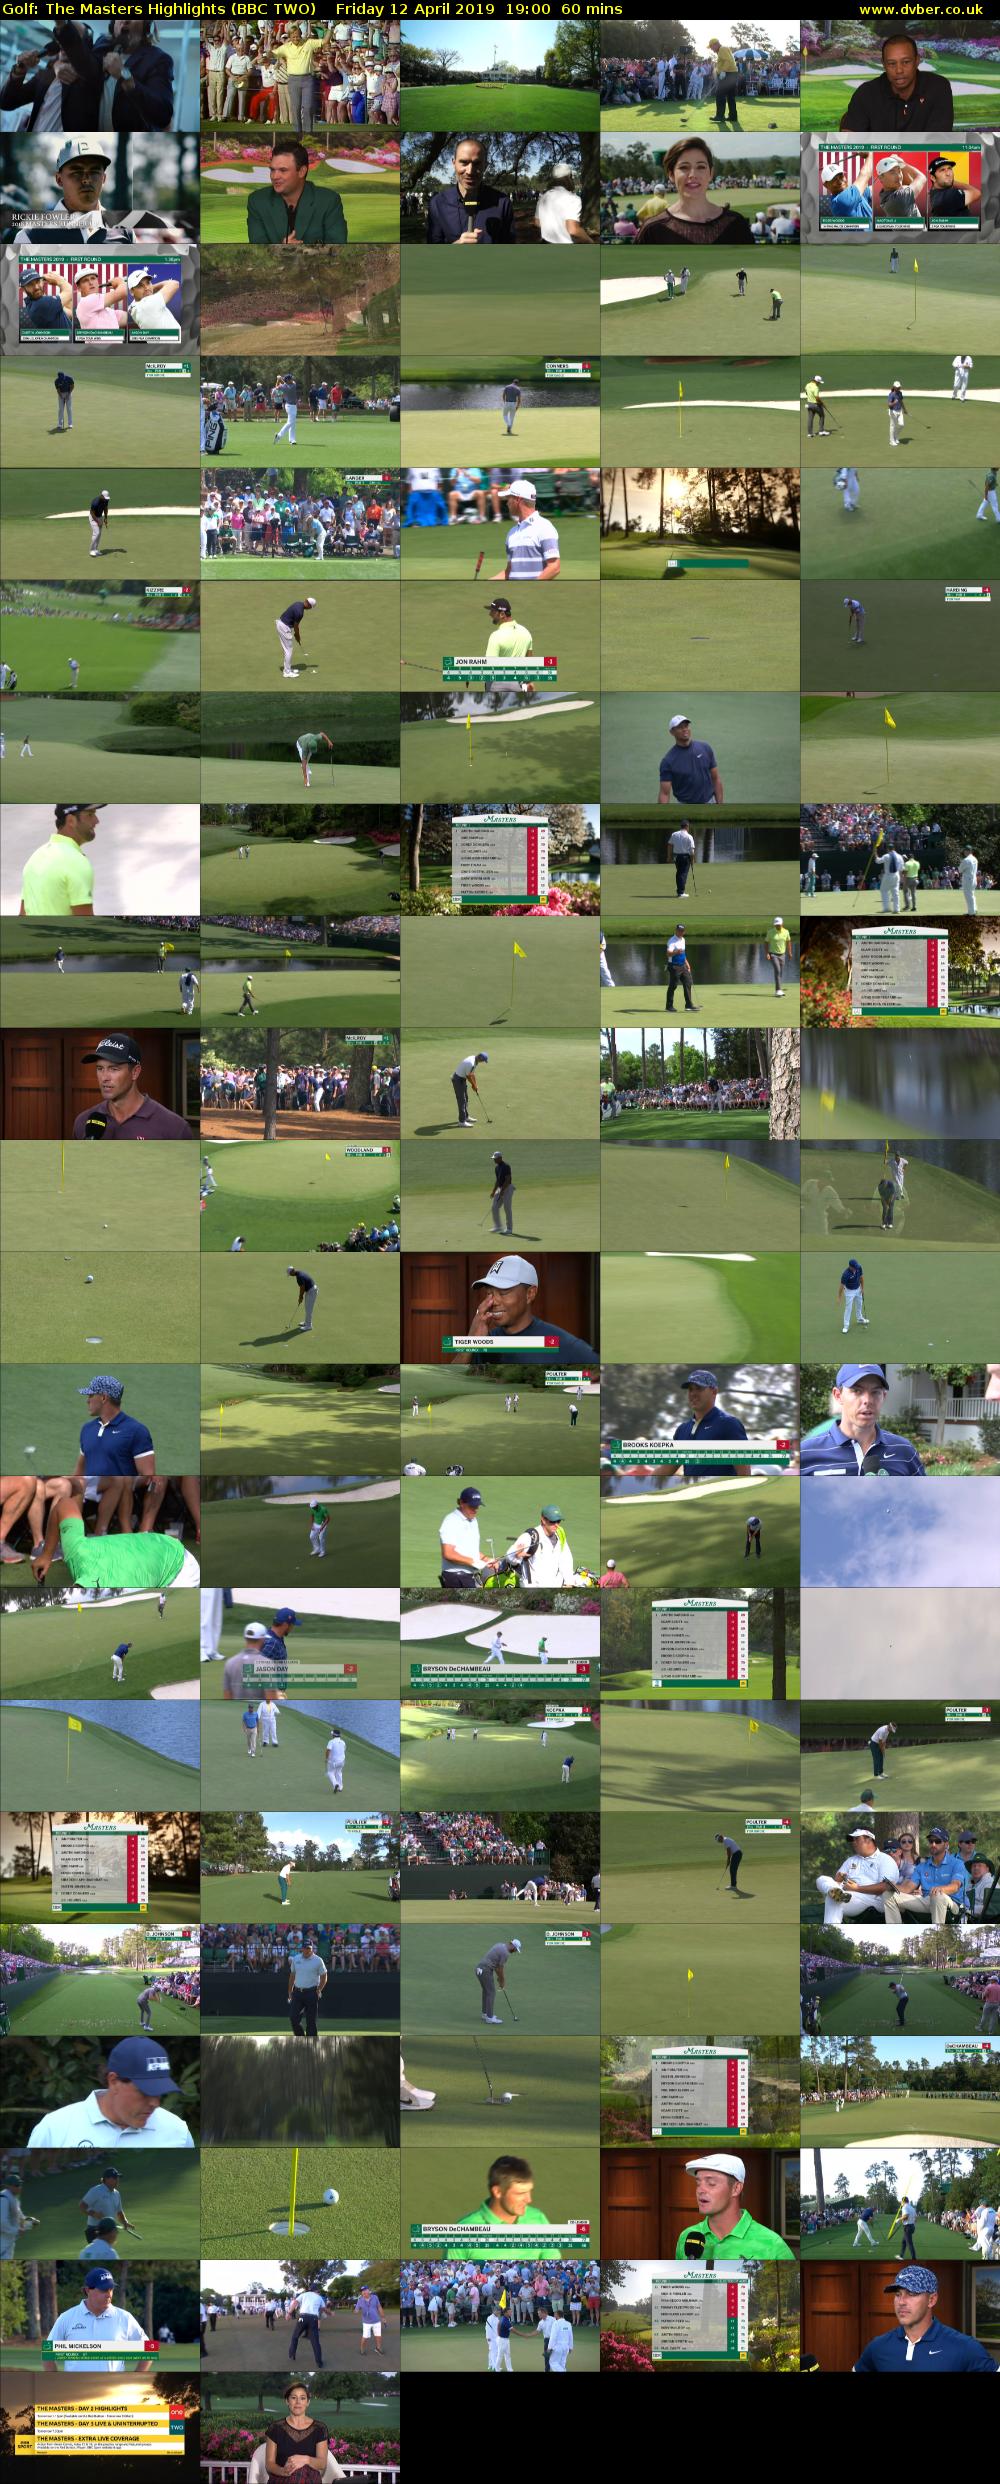 Golf: The Masters Highlights (BBC TWO) Friday 12 April 2019 19:00 - 20:00